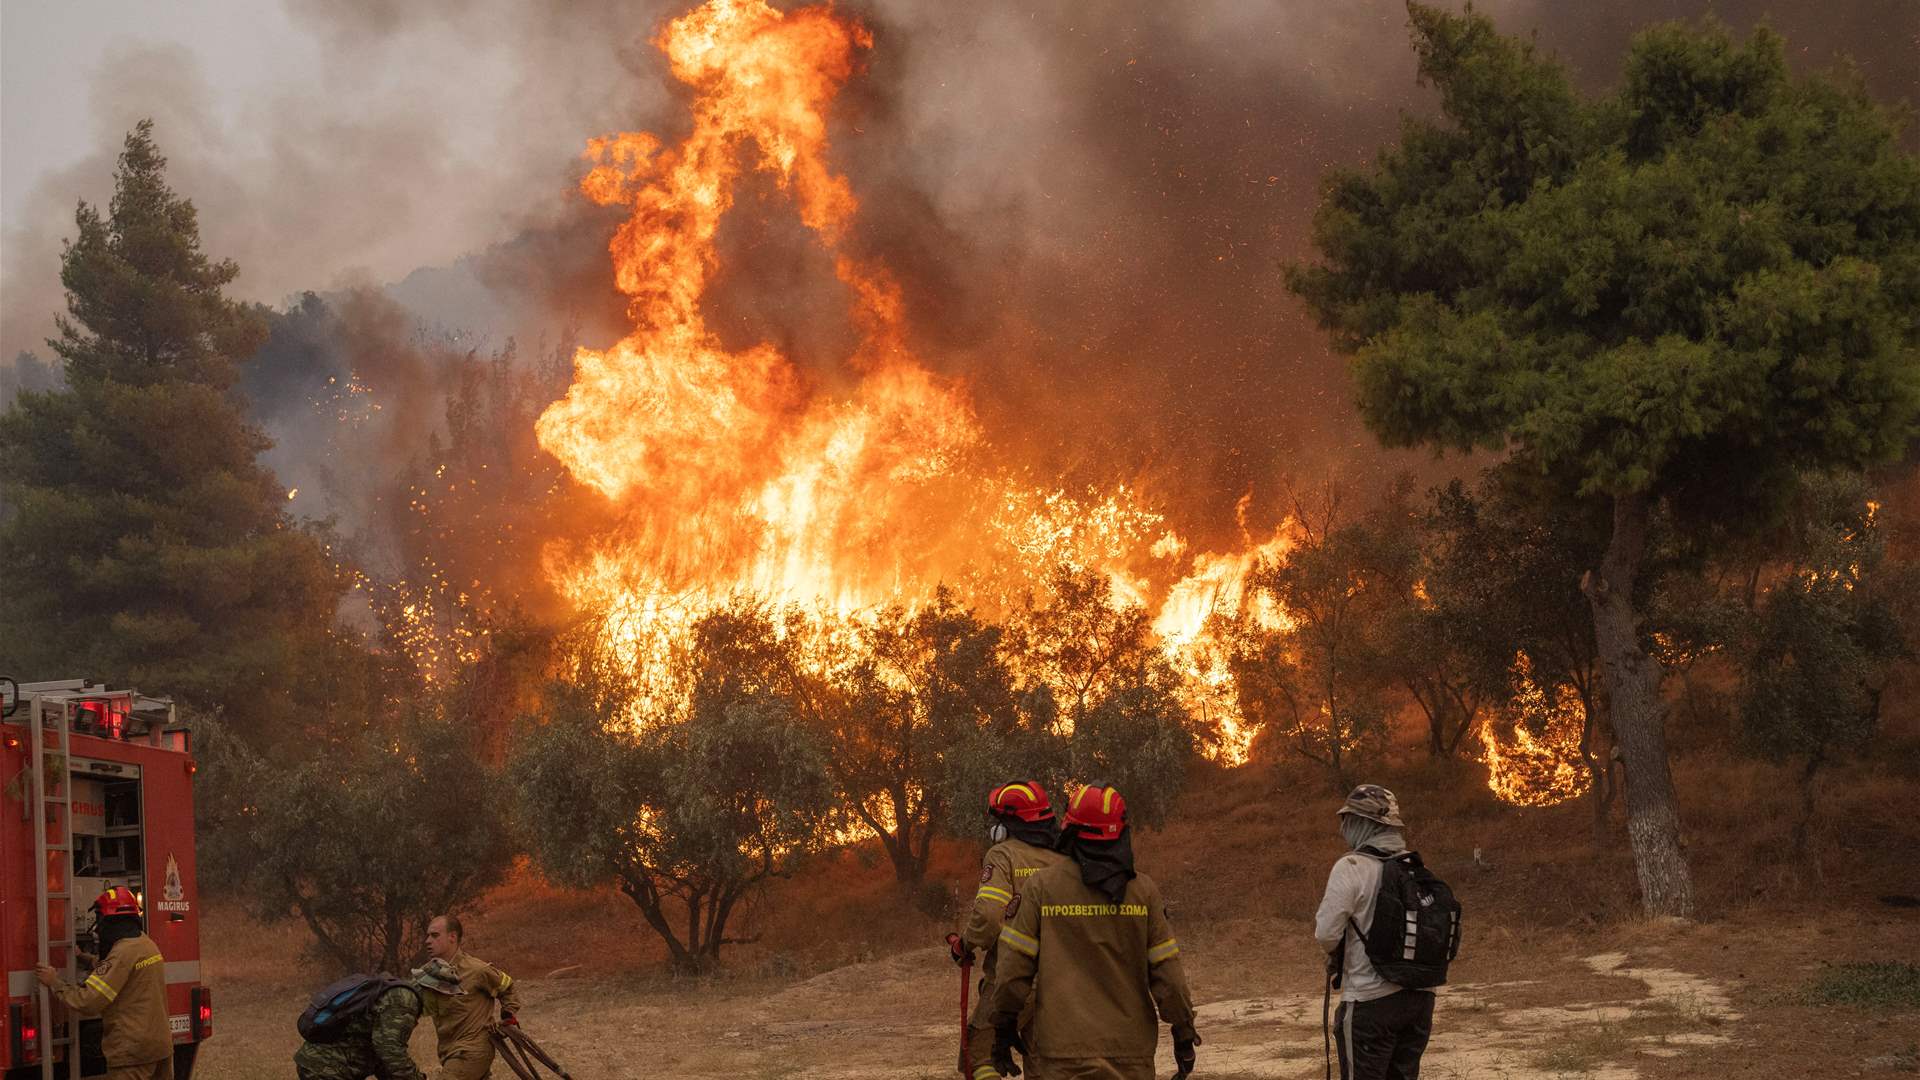 Volunteer firefighters in Greece on alert to &quot;save their mountain&quot;